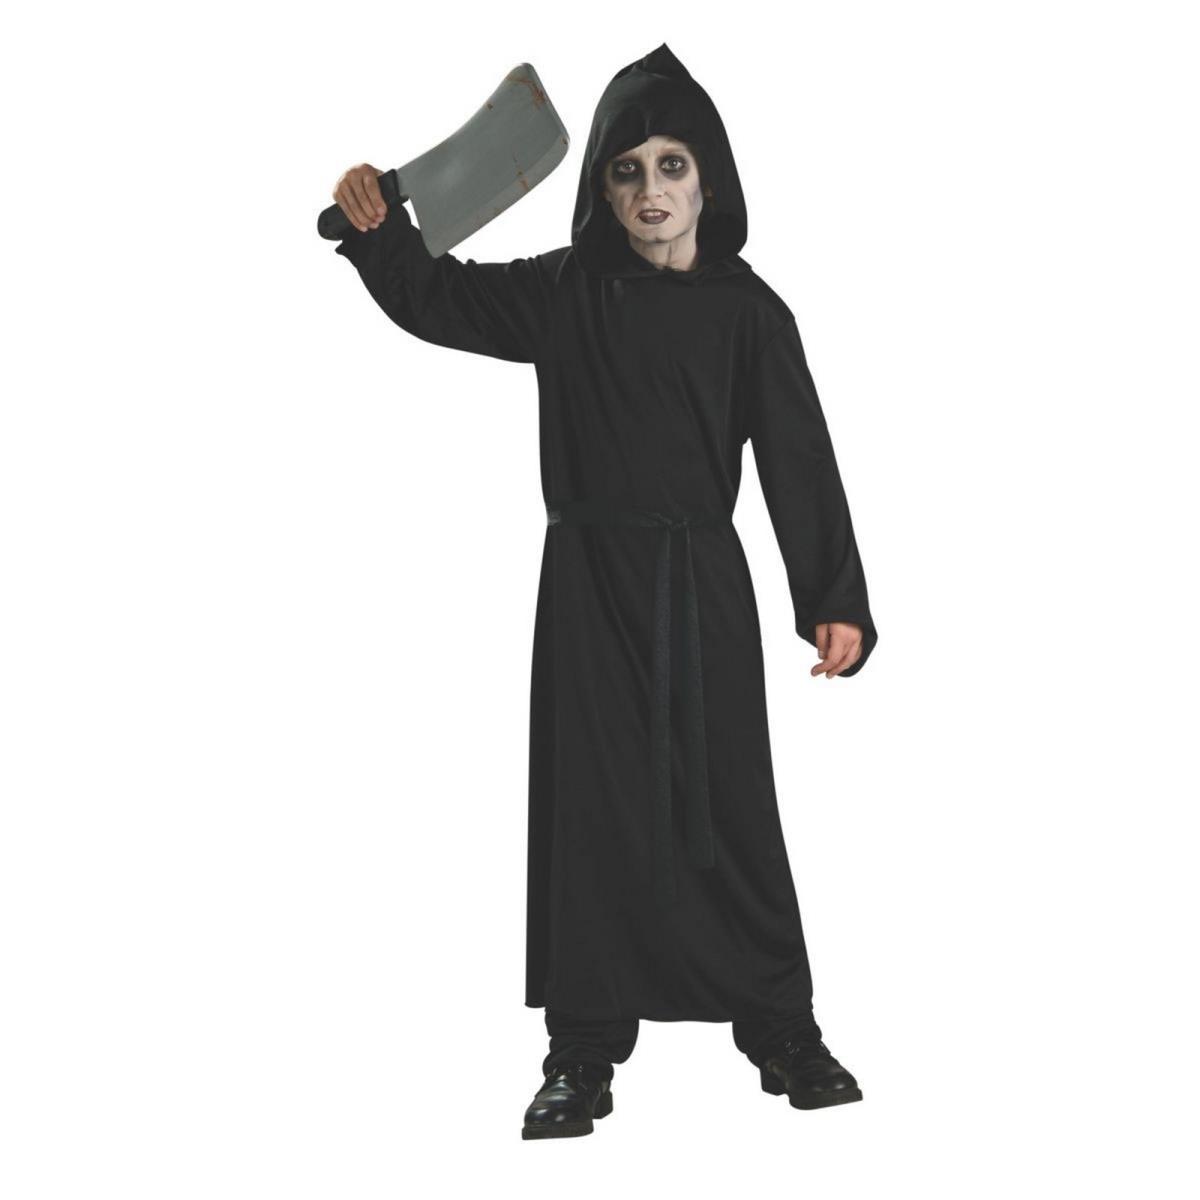 Picture of Rubies 406475 Child Fuller Cut Horror Robe Costume for Boys, Large